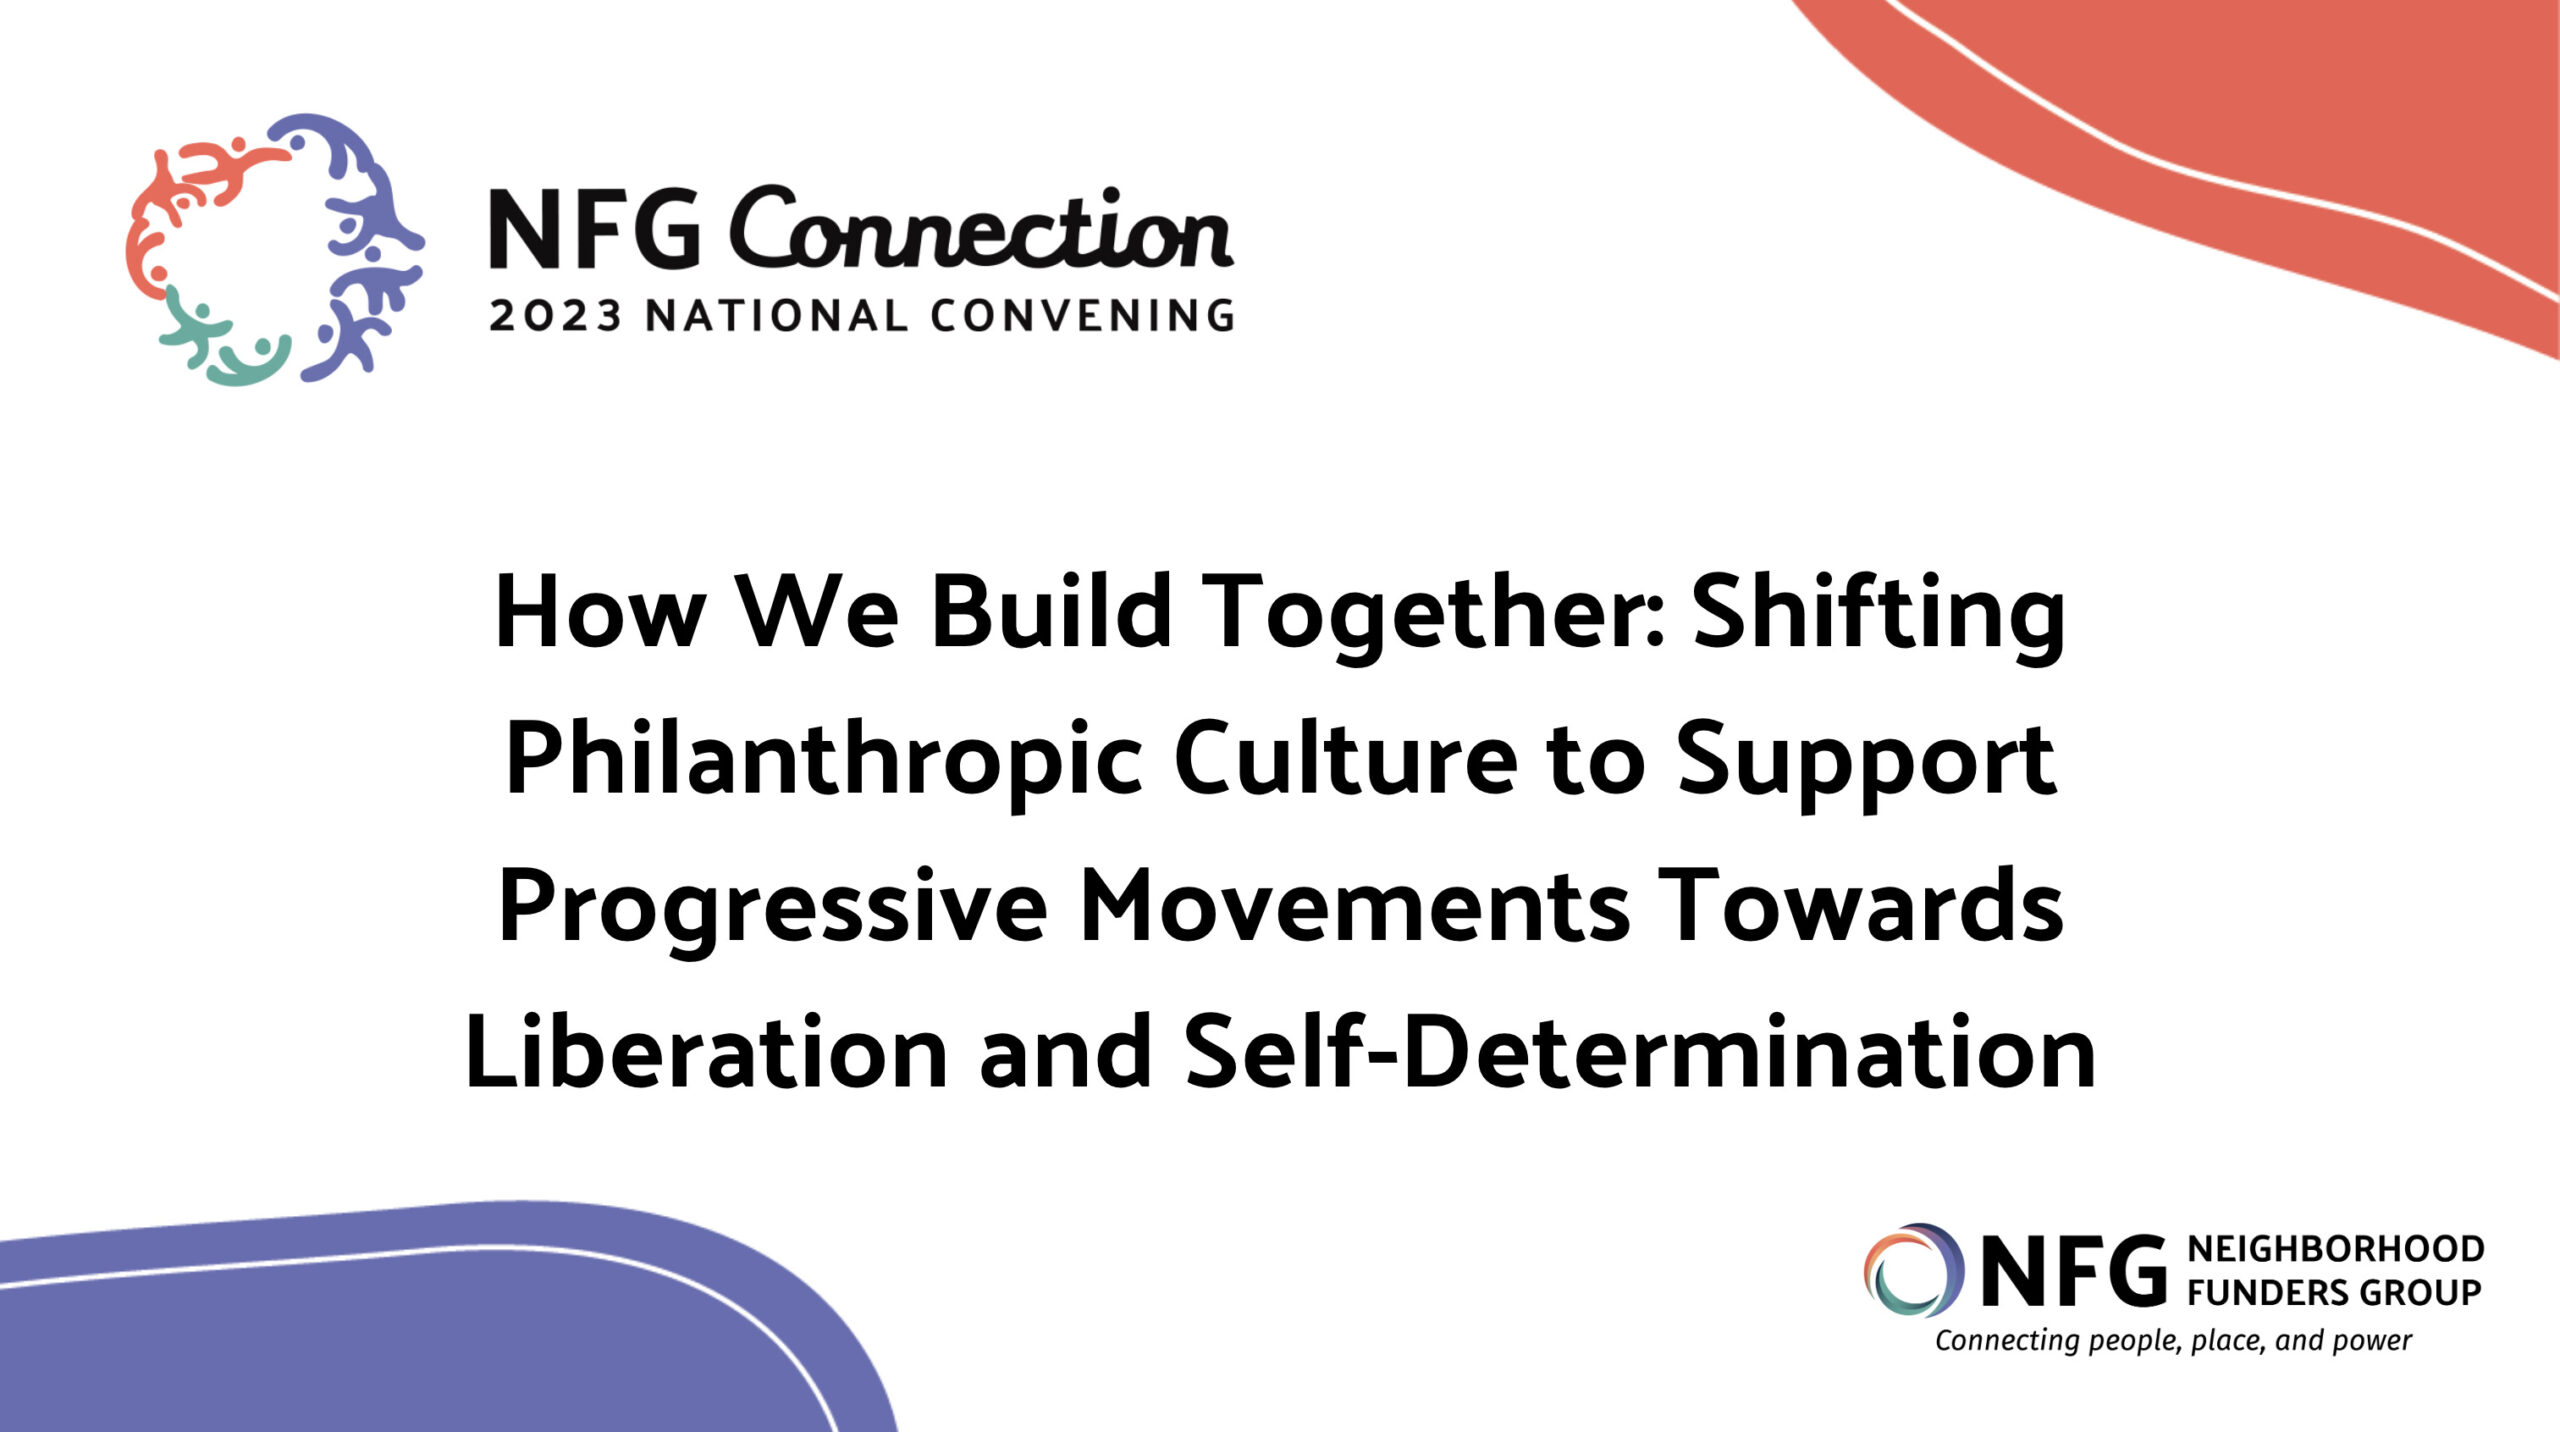 Title card for NFG's 2023 National Convening Plenary 3: "How We Build Together: Shifting Philanthropic Culture to Support Progressive Movements Towards Liberation and Self-Determination"